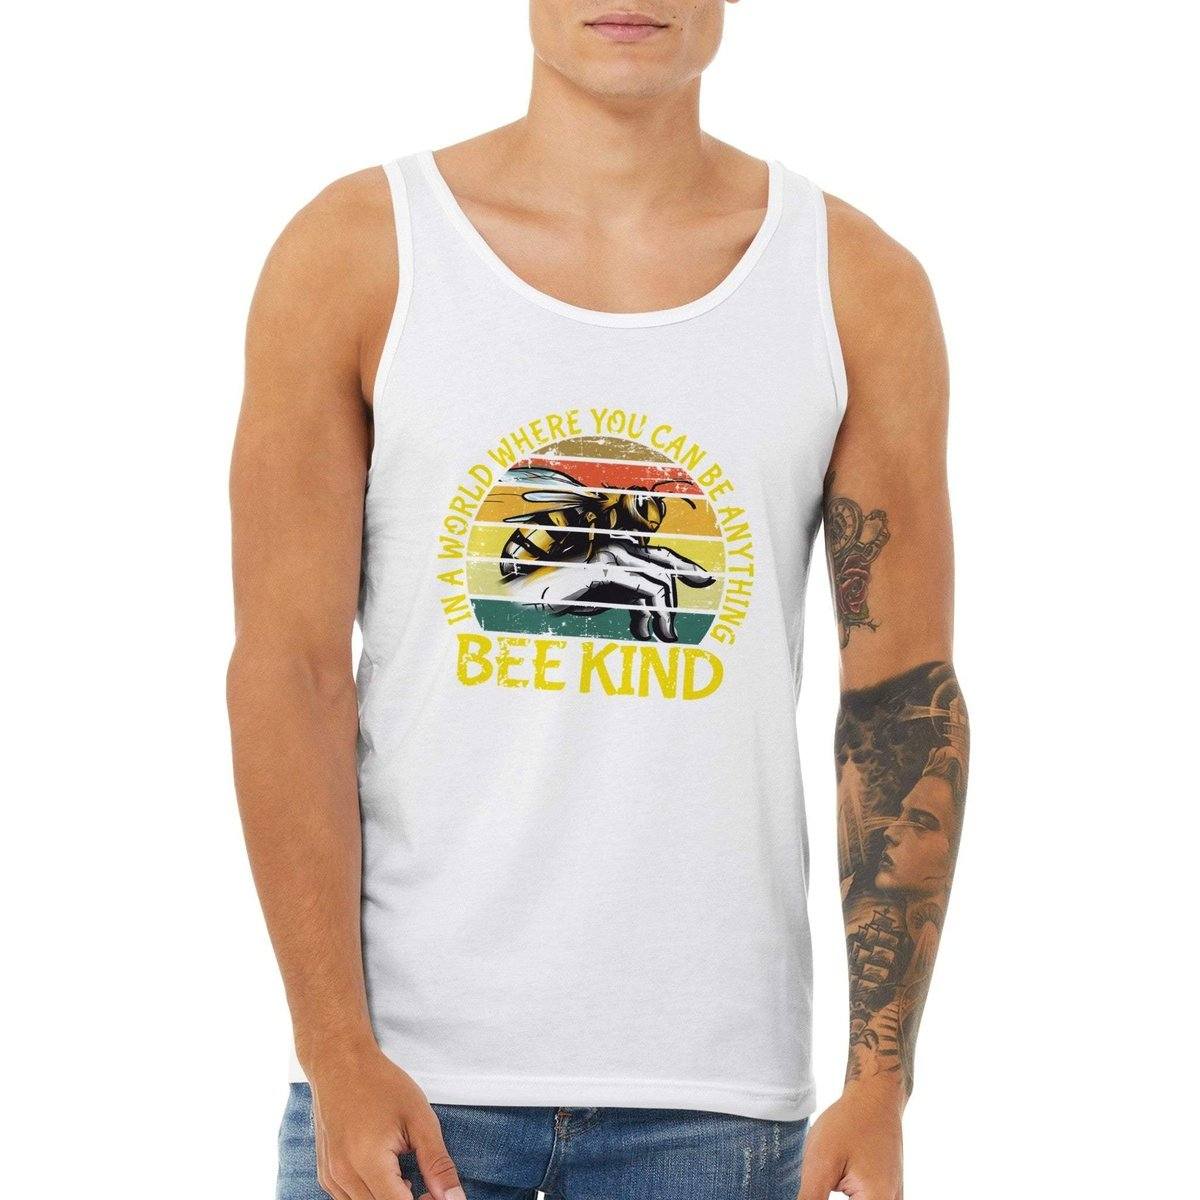 In a world where you can be anything bee kind Tank Top - Retro Vintage Bee - Premium Unisex Tank Top Australia Online Color White / XS